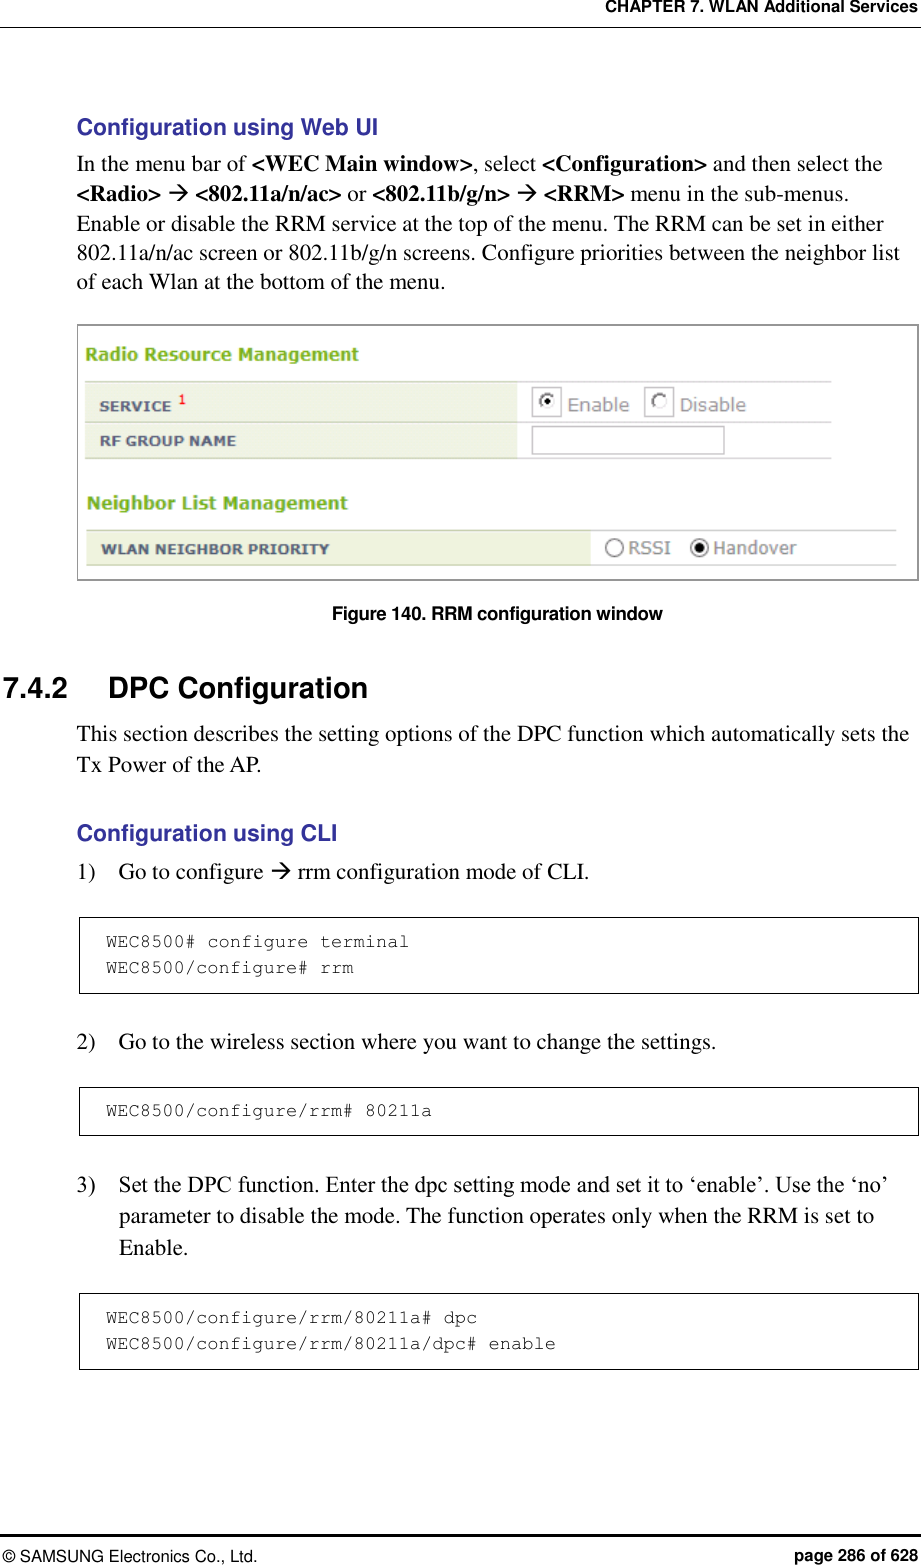 CHAPTER 7. WLAN Additional Services ©  SAMSUNG Electronics Co., Ltd.  page 286 of 628 Configuration using Web UI In the menu bar of &lt;WEC Main window&gt;, select &lt;Configuration&gt; and then select the &lt;Radio&gt;  &lt;802.11a/n/ac&gt; or &lt;802.11b/g/n&gt;  &lt;RRM&gt; menu in the sub-menus. Enable or disable the RRM service at the top of the menu. The RRM can be set in either 802.11a/n/ac screen or 802.11b/g/n screens. Configure priorities between the neighbor list of each Wlan at the bottom of the menu.  Figure 140. RRM configuration window  7.4.2  DPC Configuration This section describes the setting options of the DPC function which automatically sets the Tx Power of the AP.  Configuration using CLI 1)    Go to configure  rrm configuration mode of CLI.  WEC8500# configure terminal WEC8500/configure# rrm  2)    Go to the wireless section where you want to change the settings.  WEC8500/configure/rrm# 80211a  3)    Set the DPC function. Enter the dpc setting mode and set it to ‘enable’. Use the ‘no’ parameter to disable the mode. The function operates only when the RRM is set to Enable.  WEC8500/configure/rrm/80211a# dpc WEC8500/configure/rrm/80211a/dpc# enable  